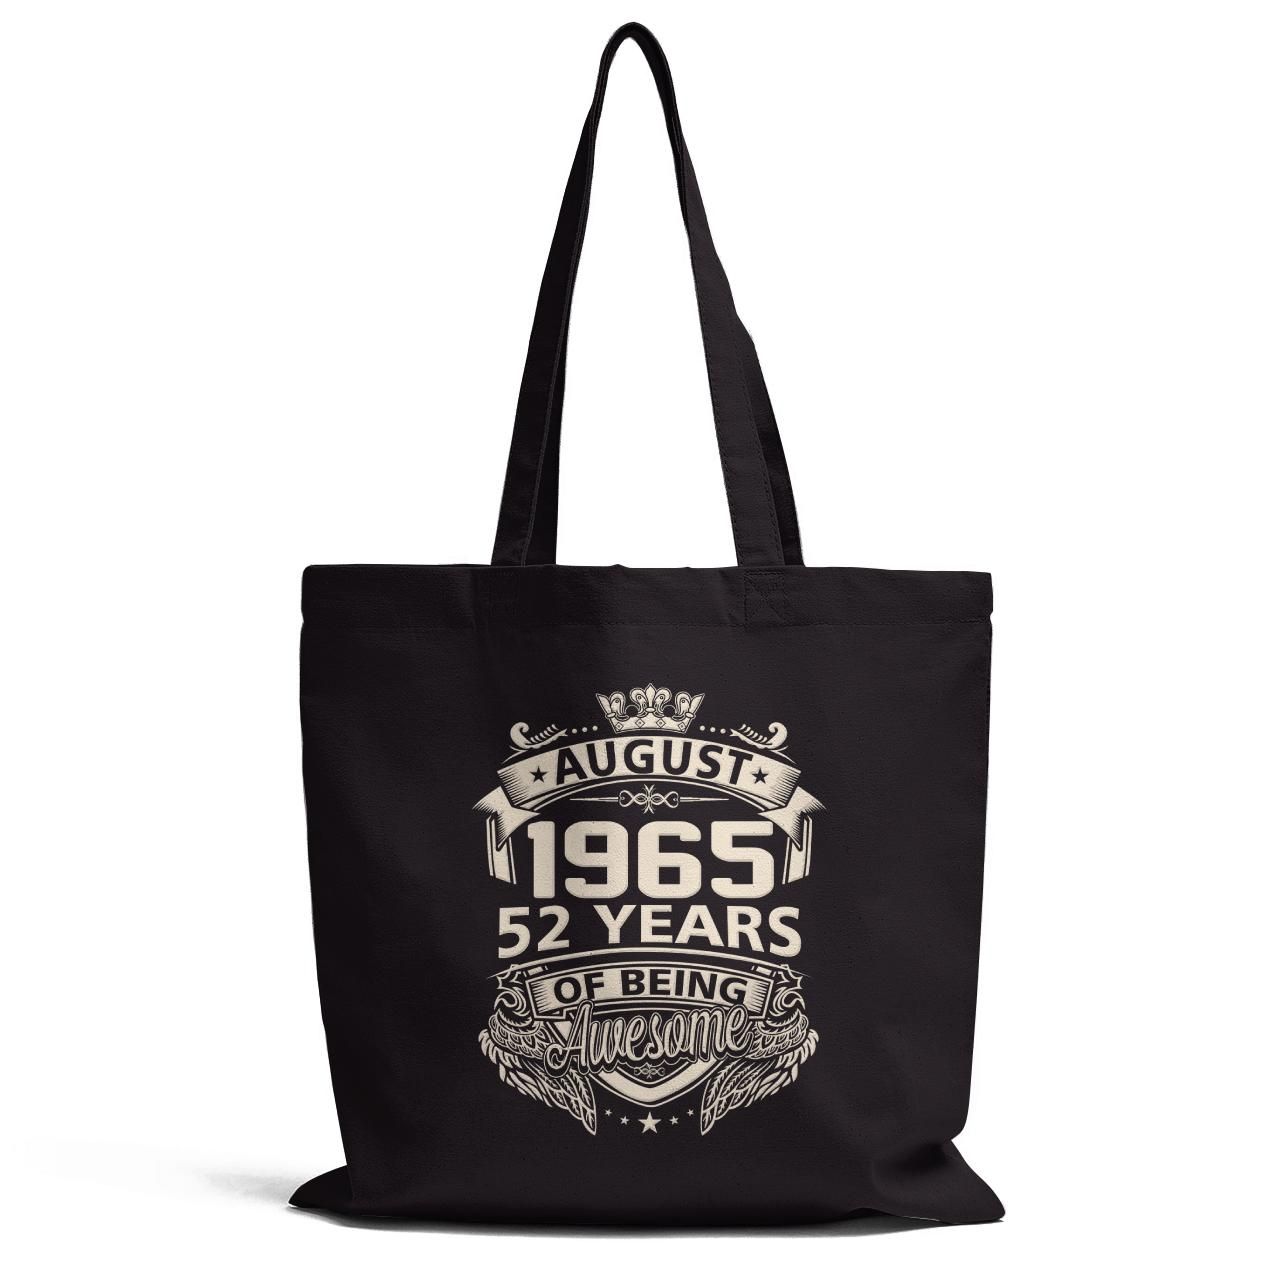 August 1965 52 Years Of Being Awesome Tote Bag